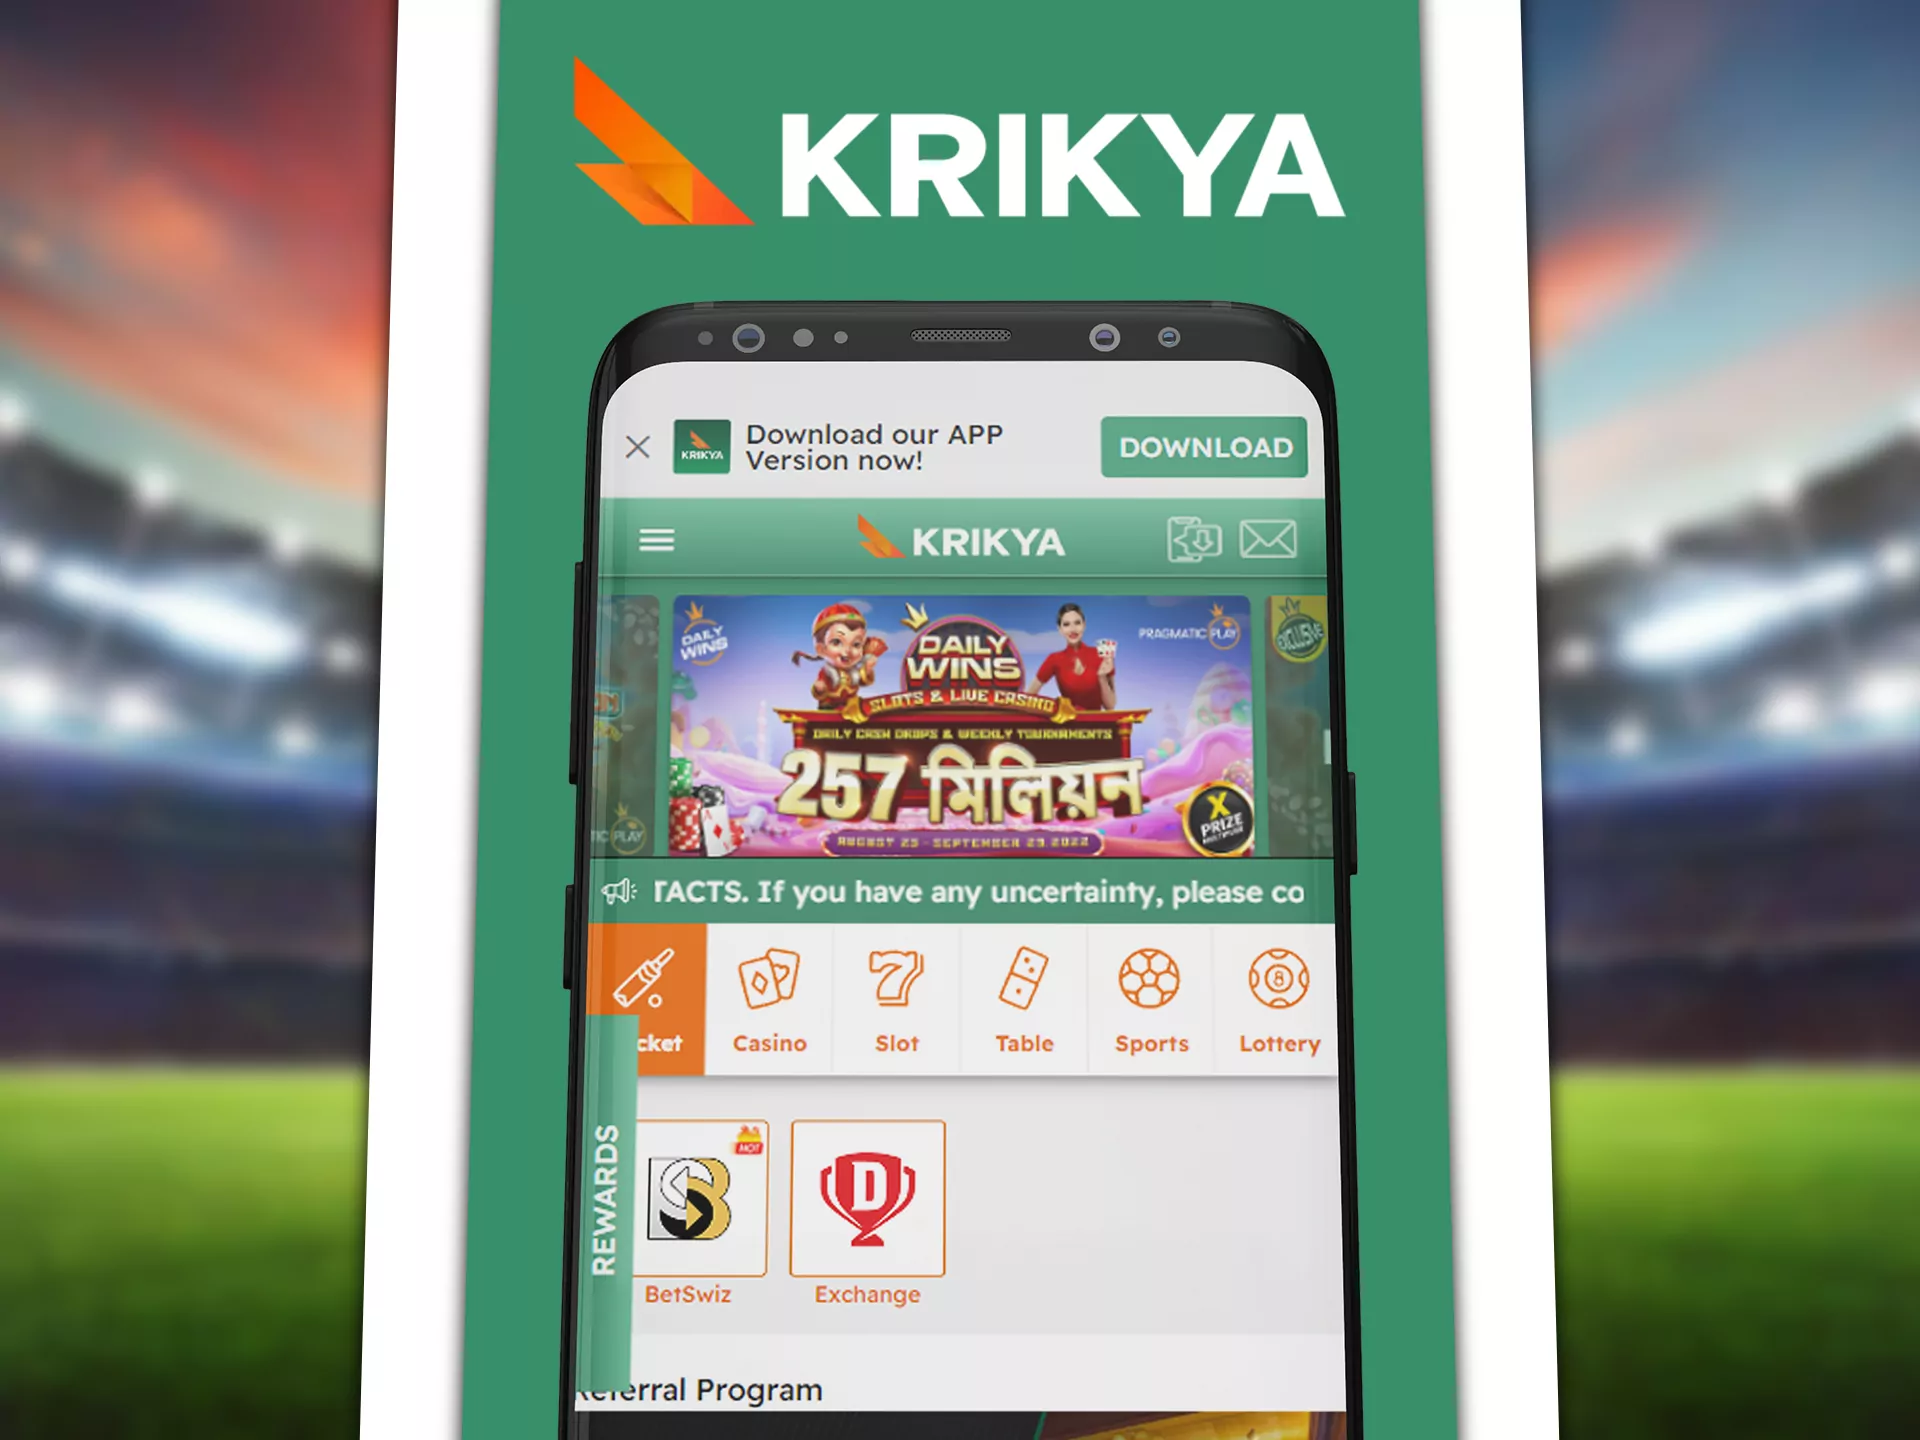 Play casino games and bet with Krikya app.